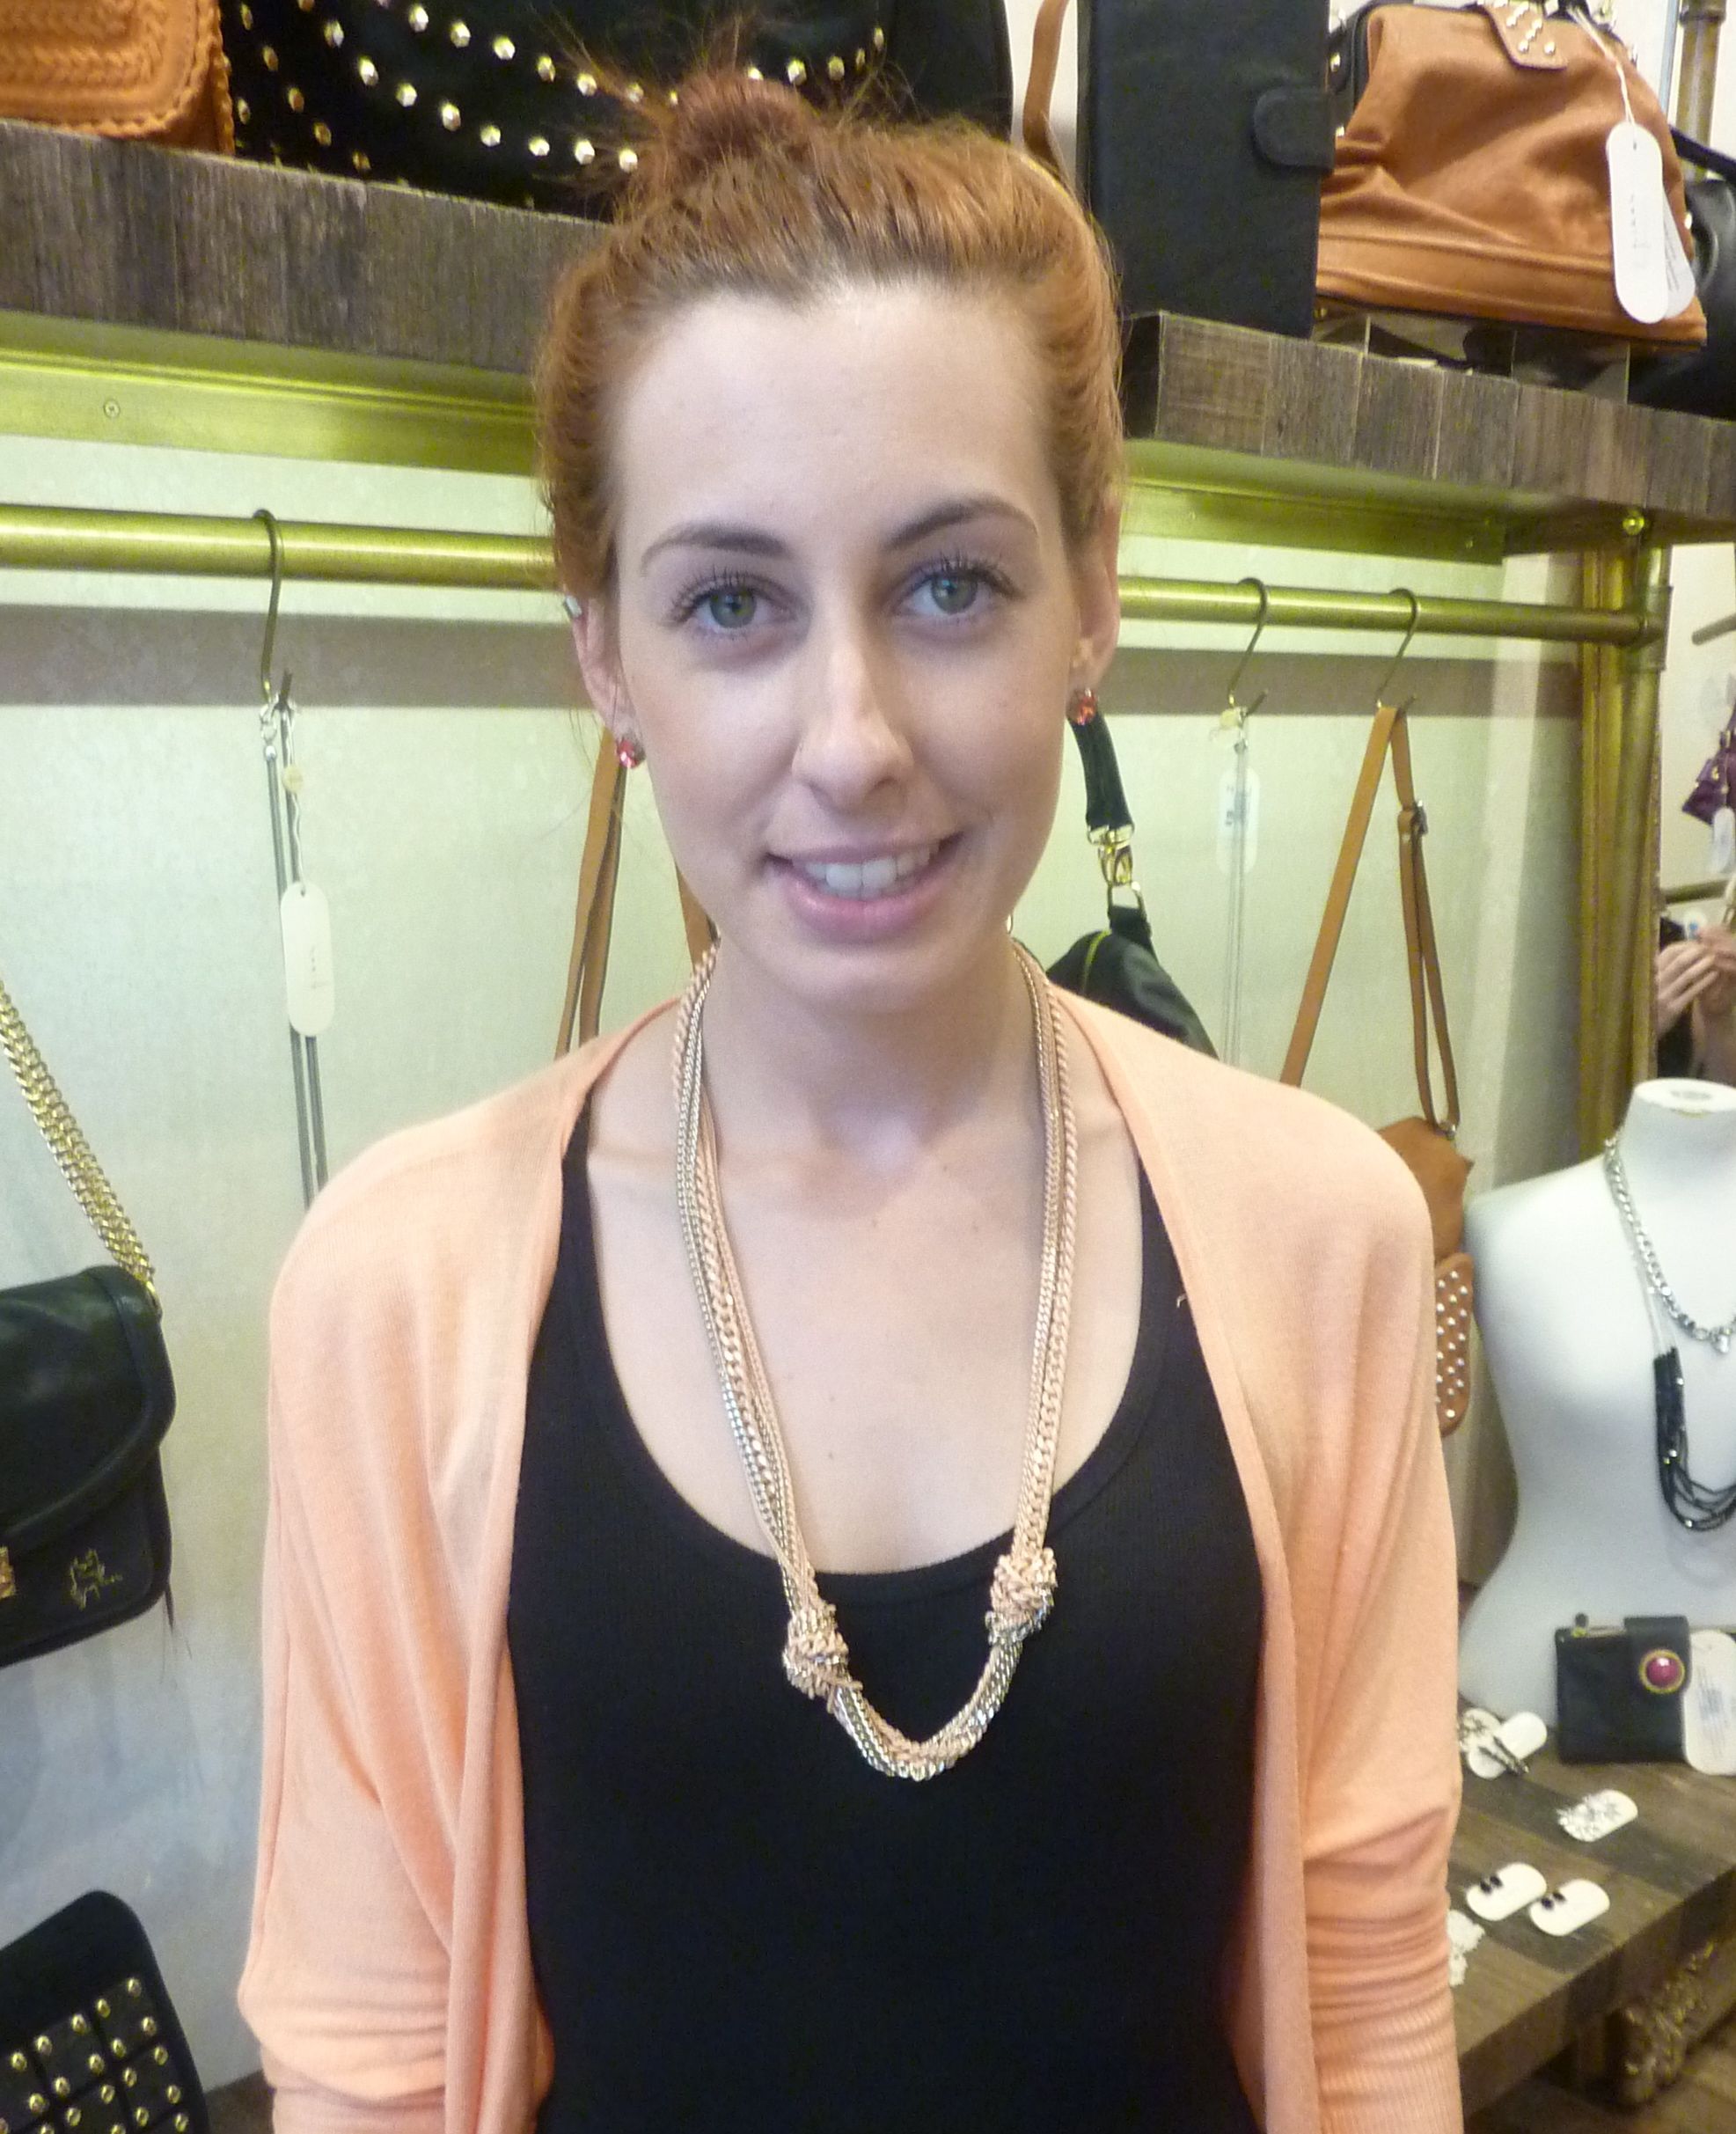 Jenna also works in store and teamed the Entangelemt necklace in Sherbet - $89 - nicely with her coral cardigan